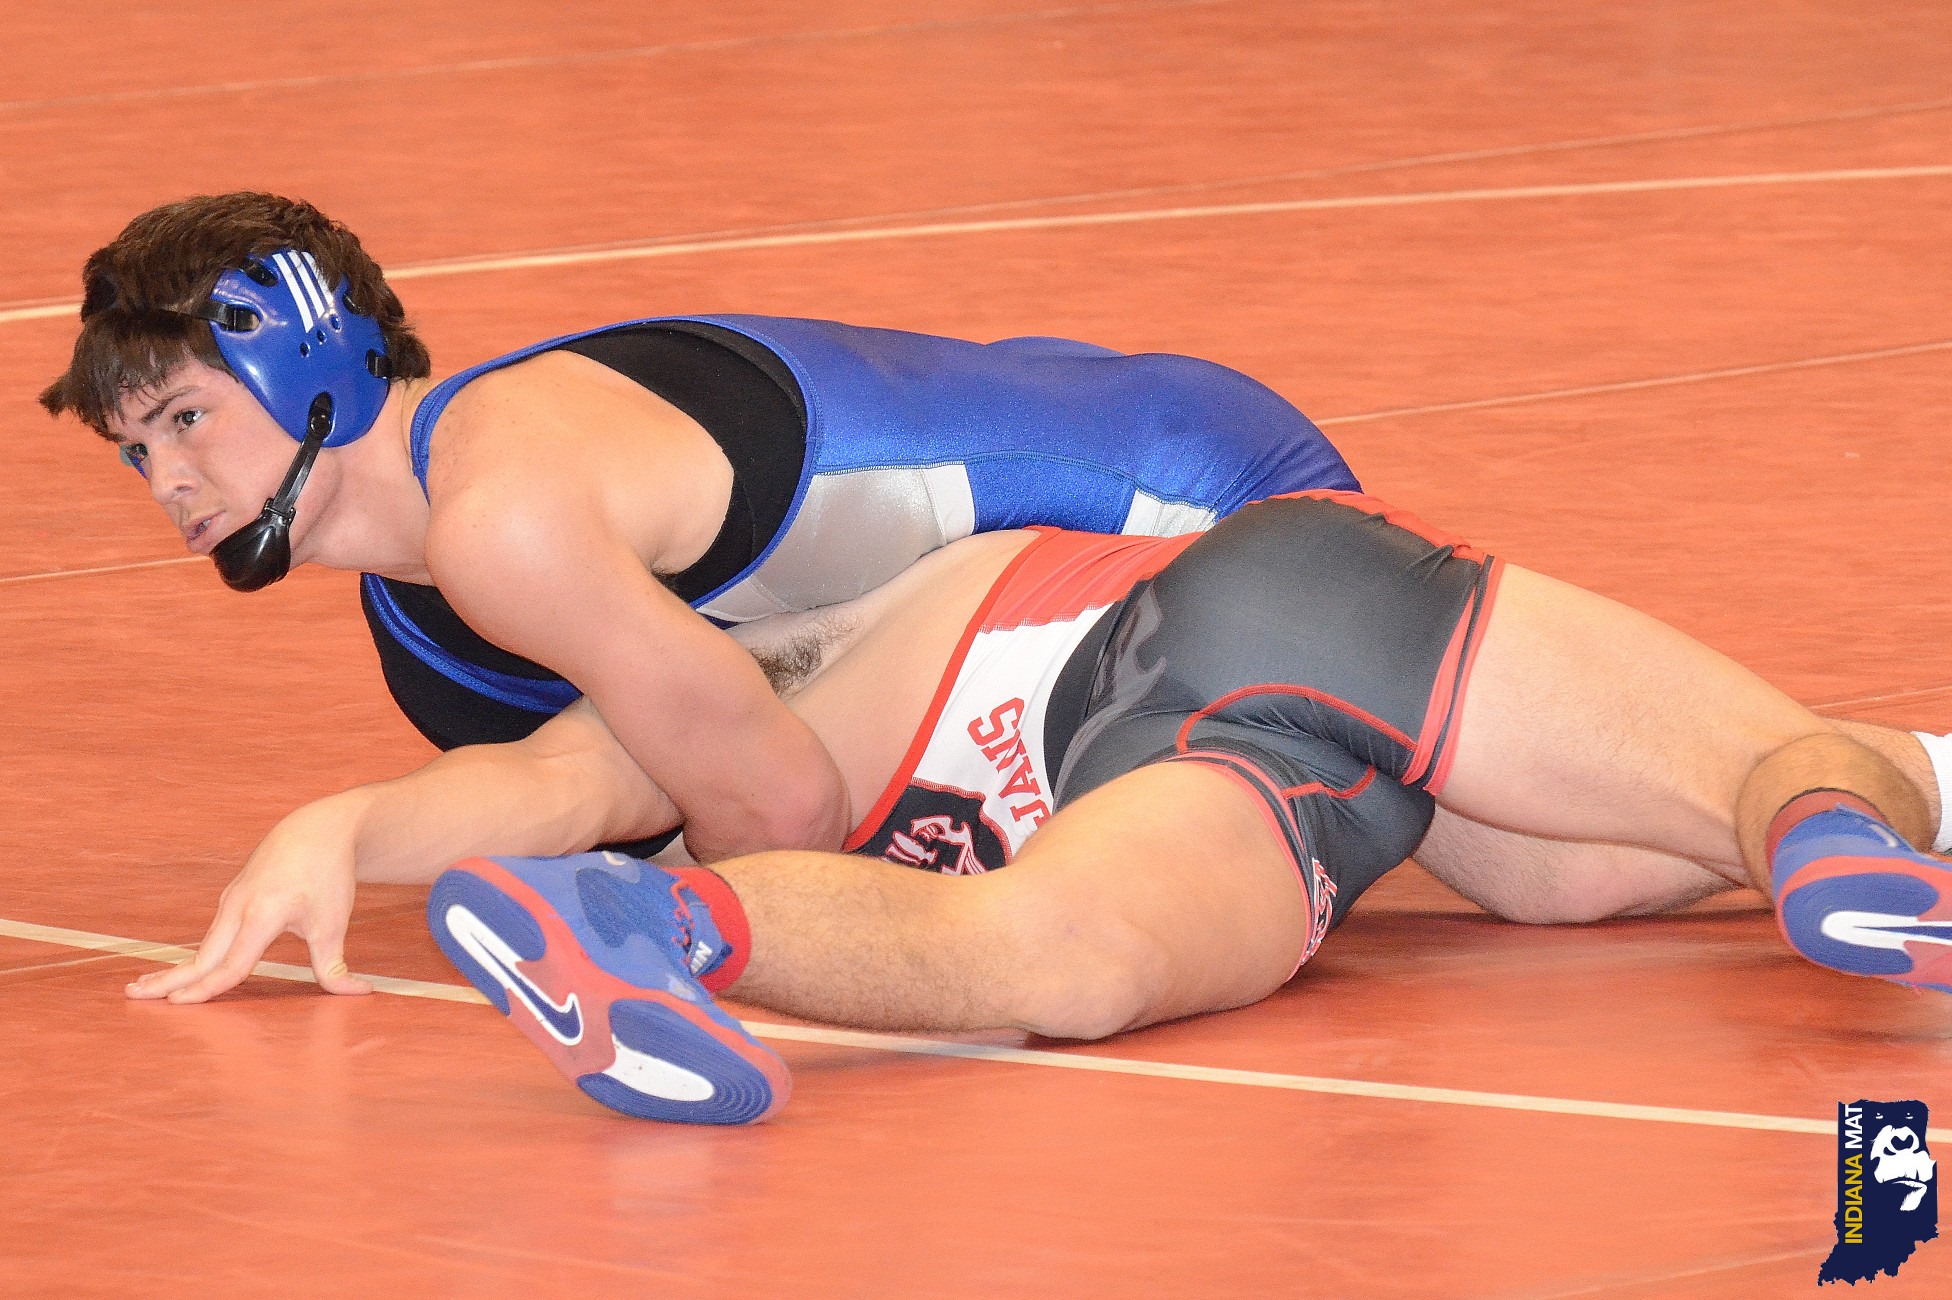 More information about "#WrestlingWednesday: Van Horn looking to corral a state title"